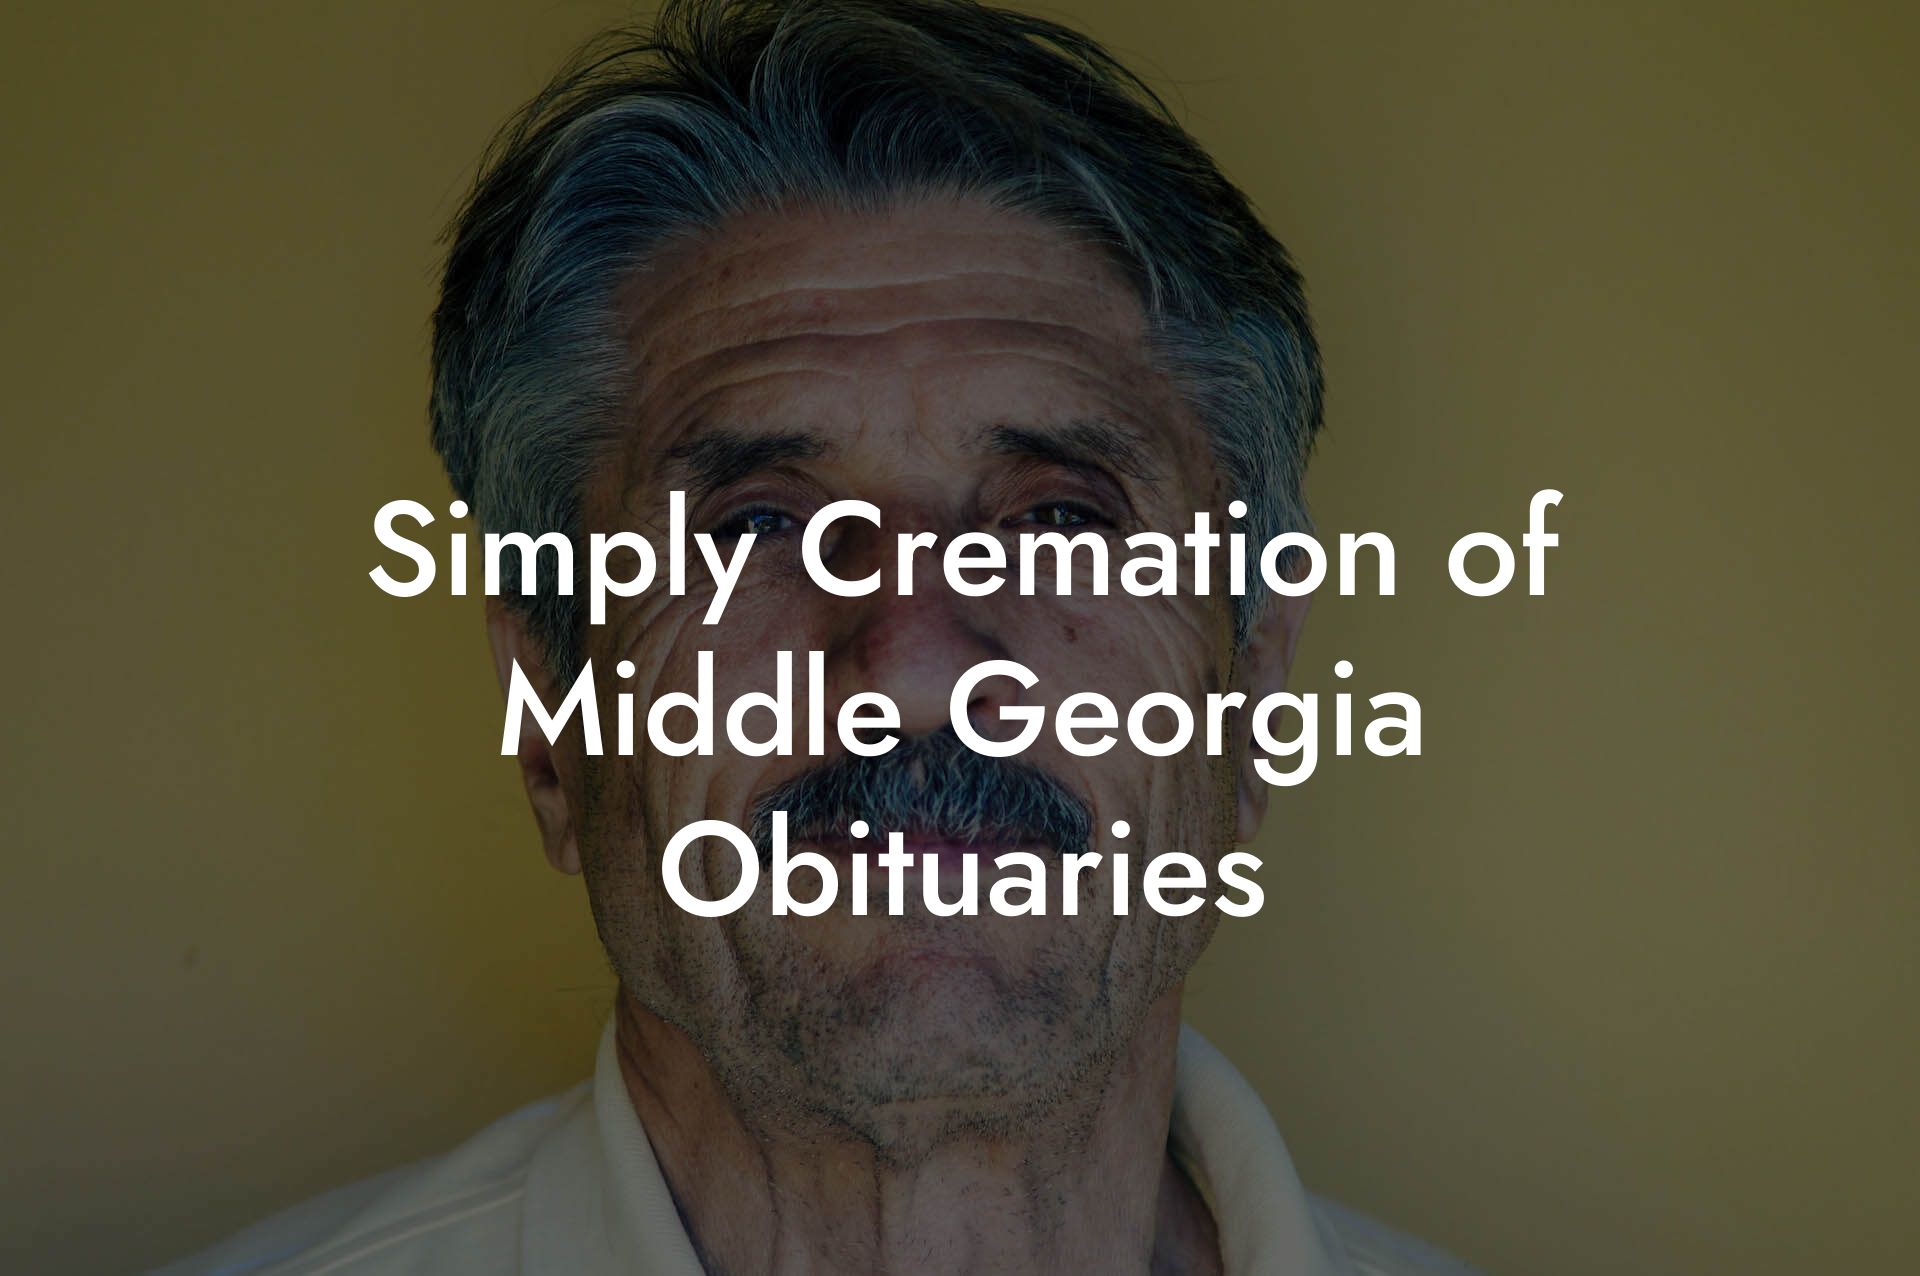 Simply Cremation of Middle Georgia Obituaries